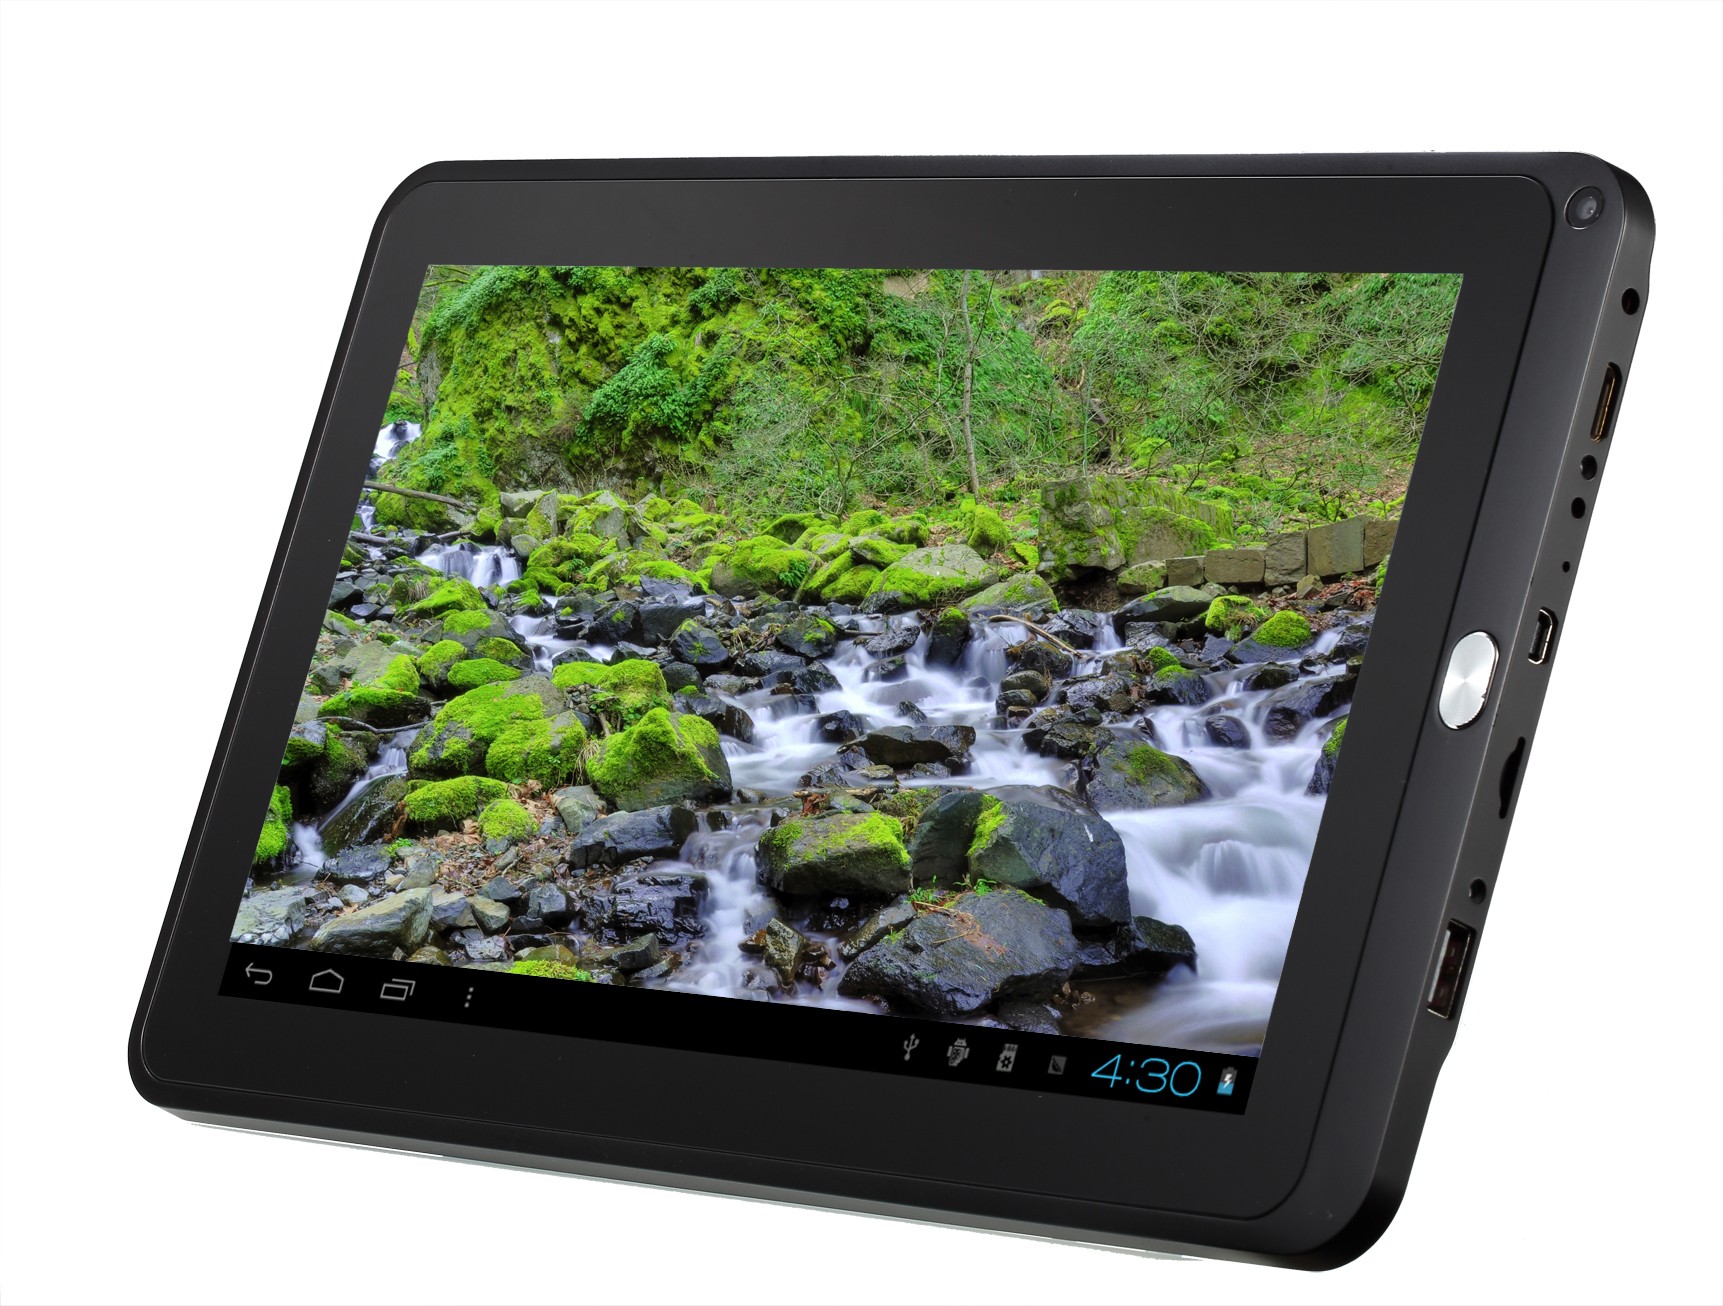 MiTraveler 10 Inch Capacitive Tablet Android 4.0 With Keyboard Case